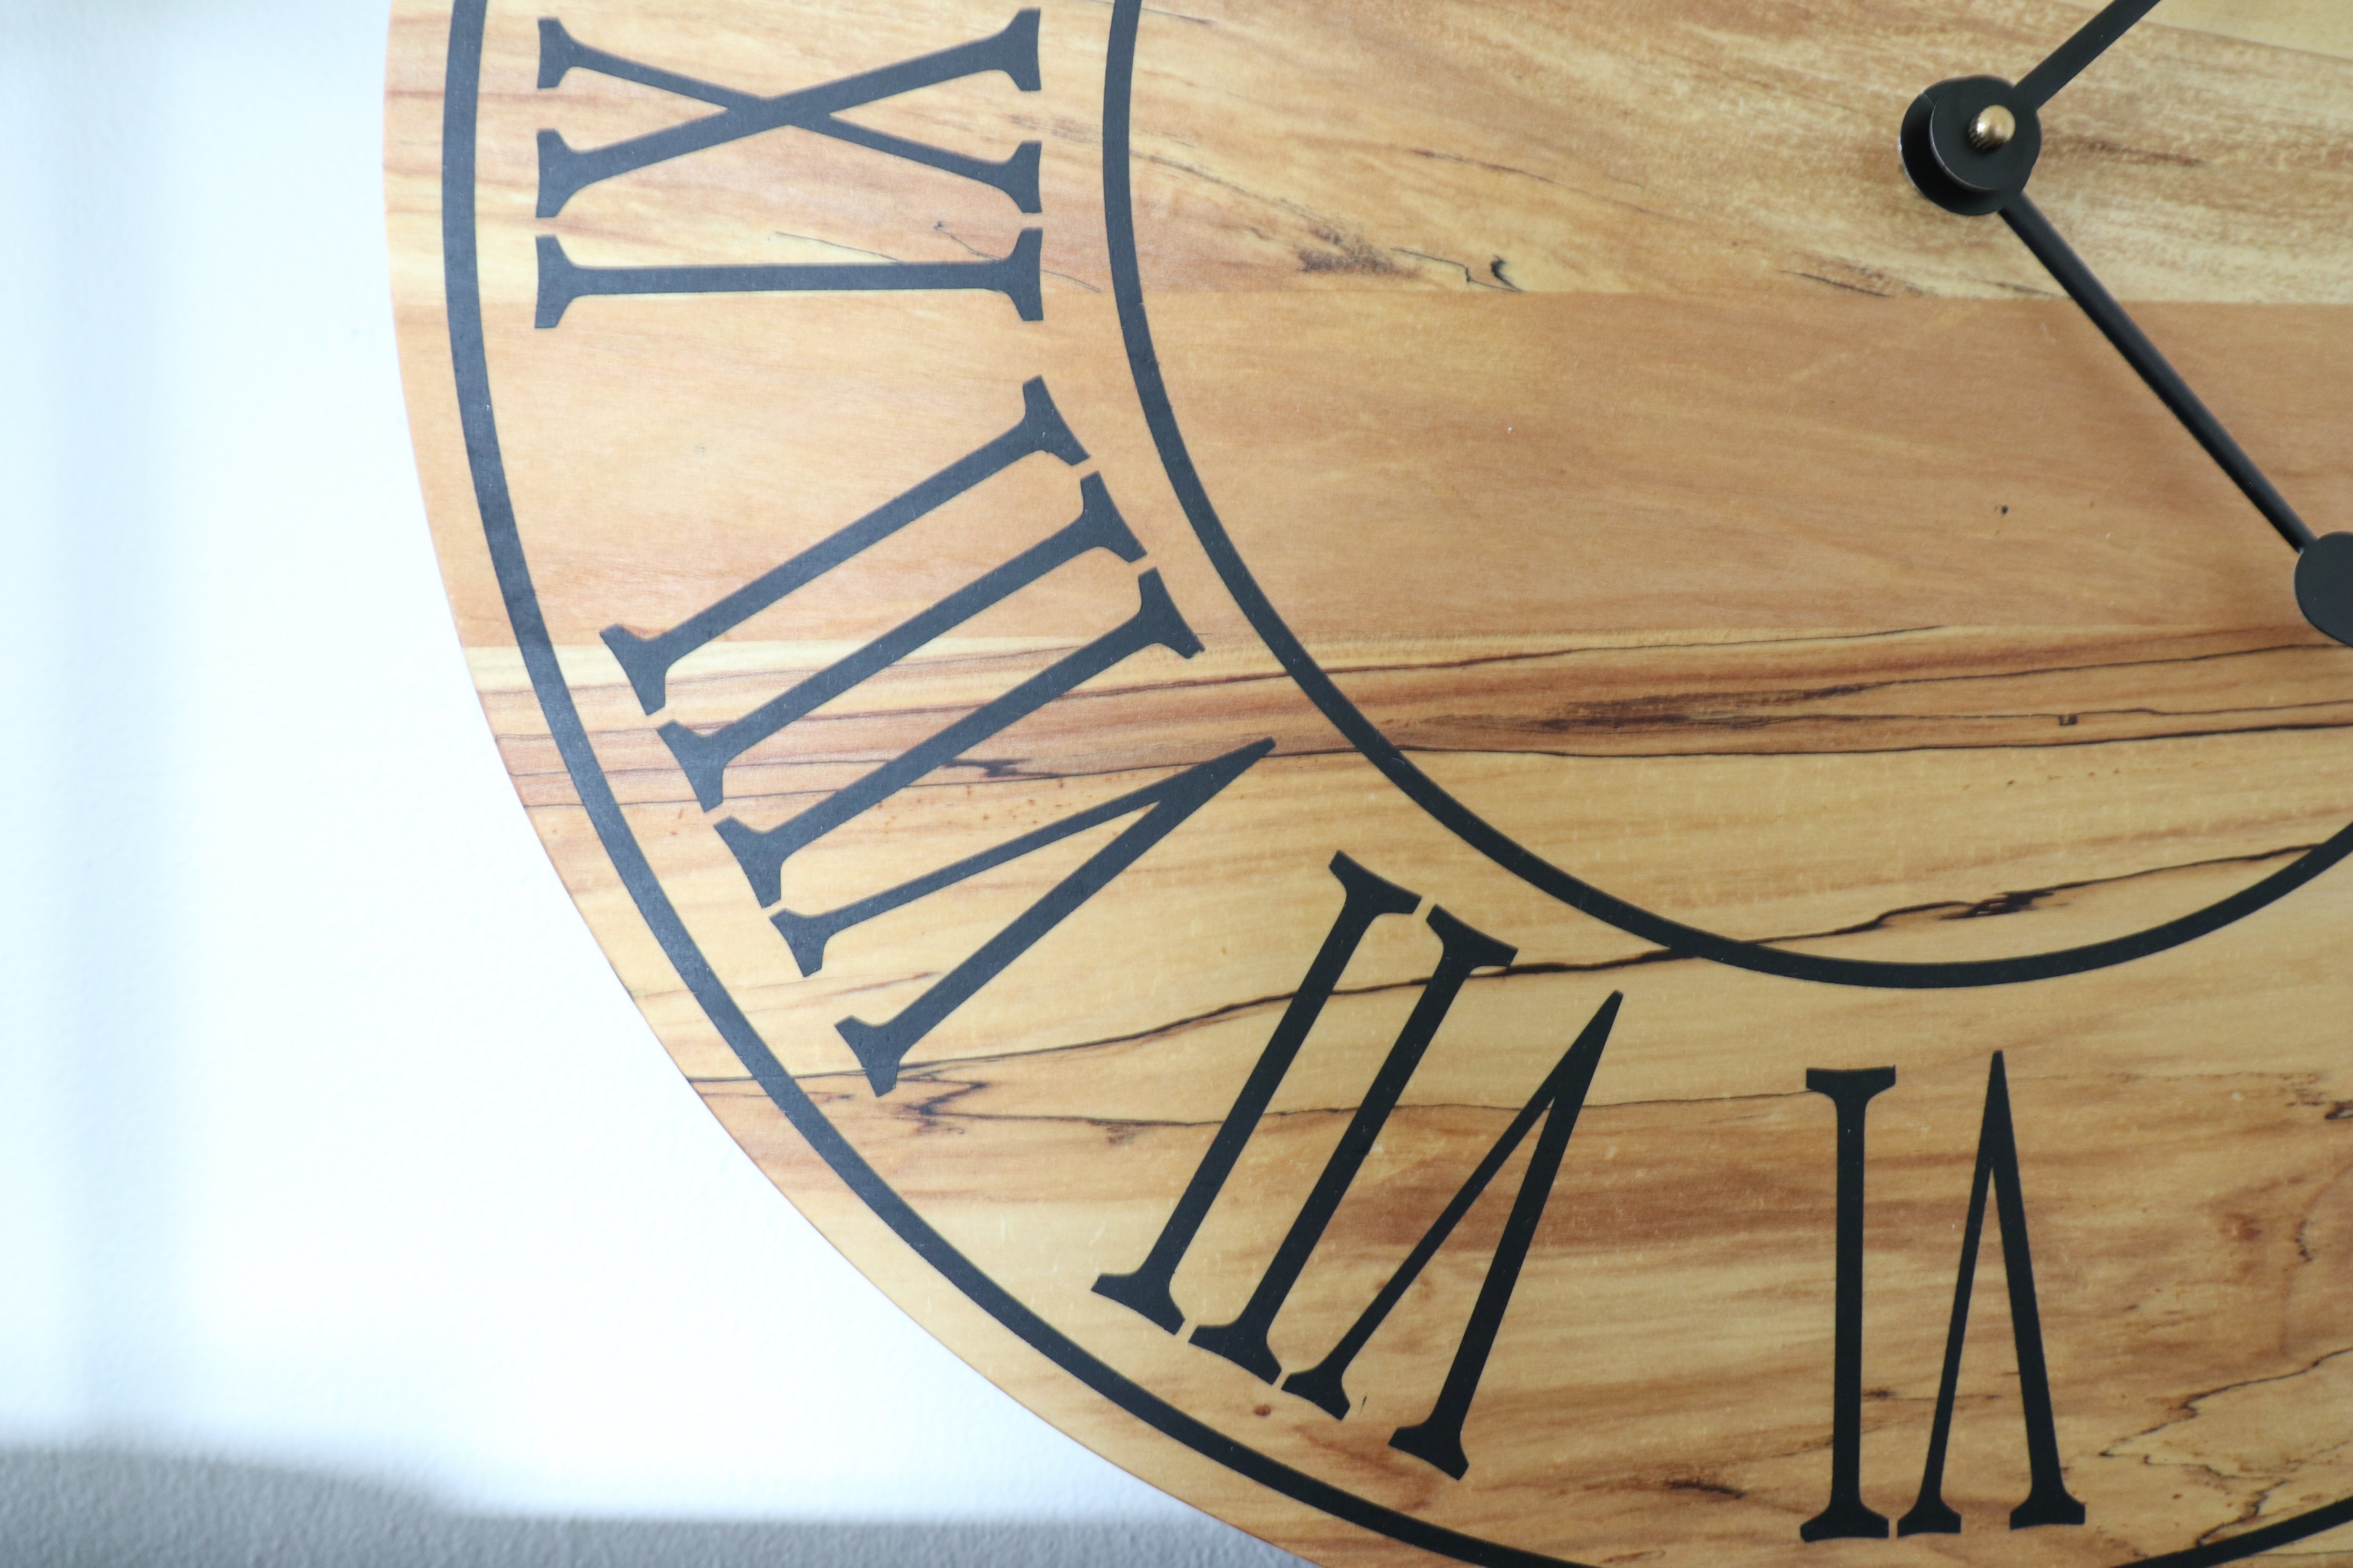 Soft Maple Clock 18" Wall Clock (in stock)